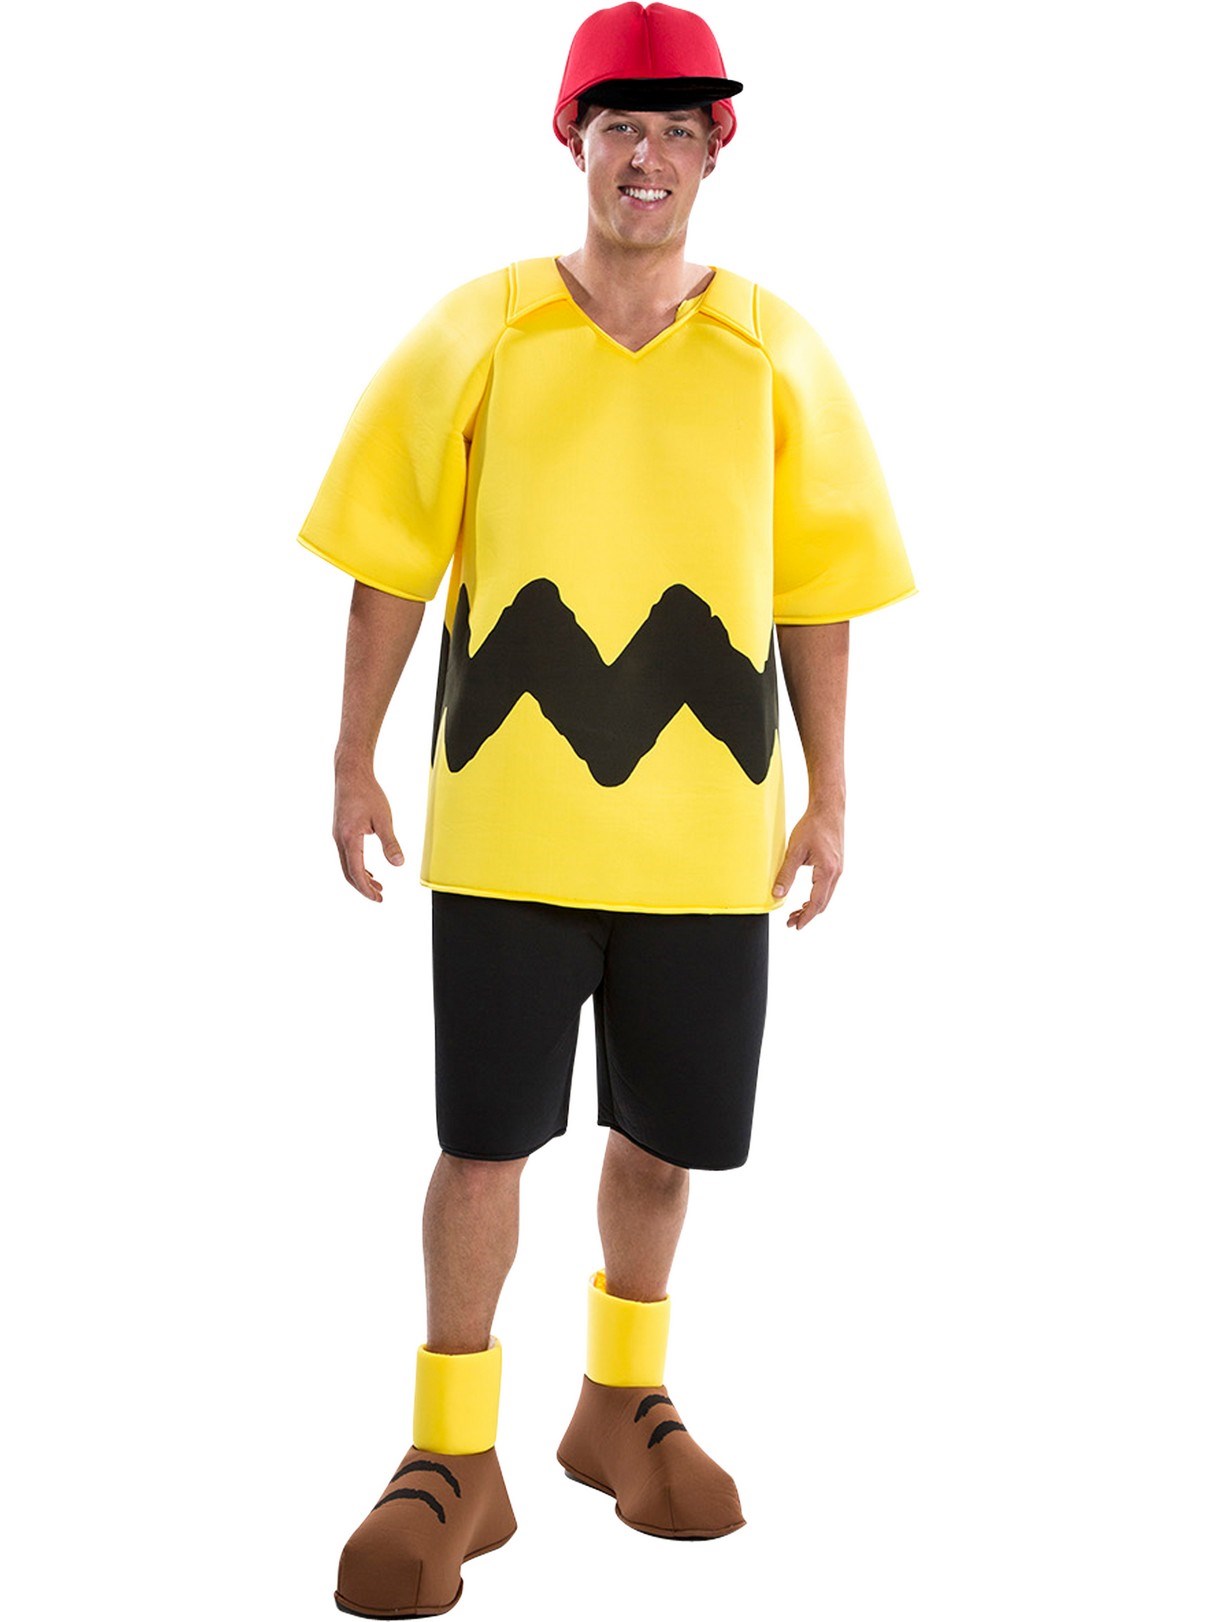 Peanuts: Deluxe Charlie Brown Costume for Adults